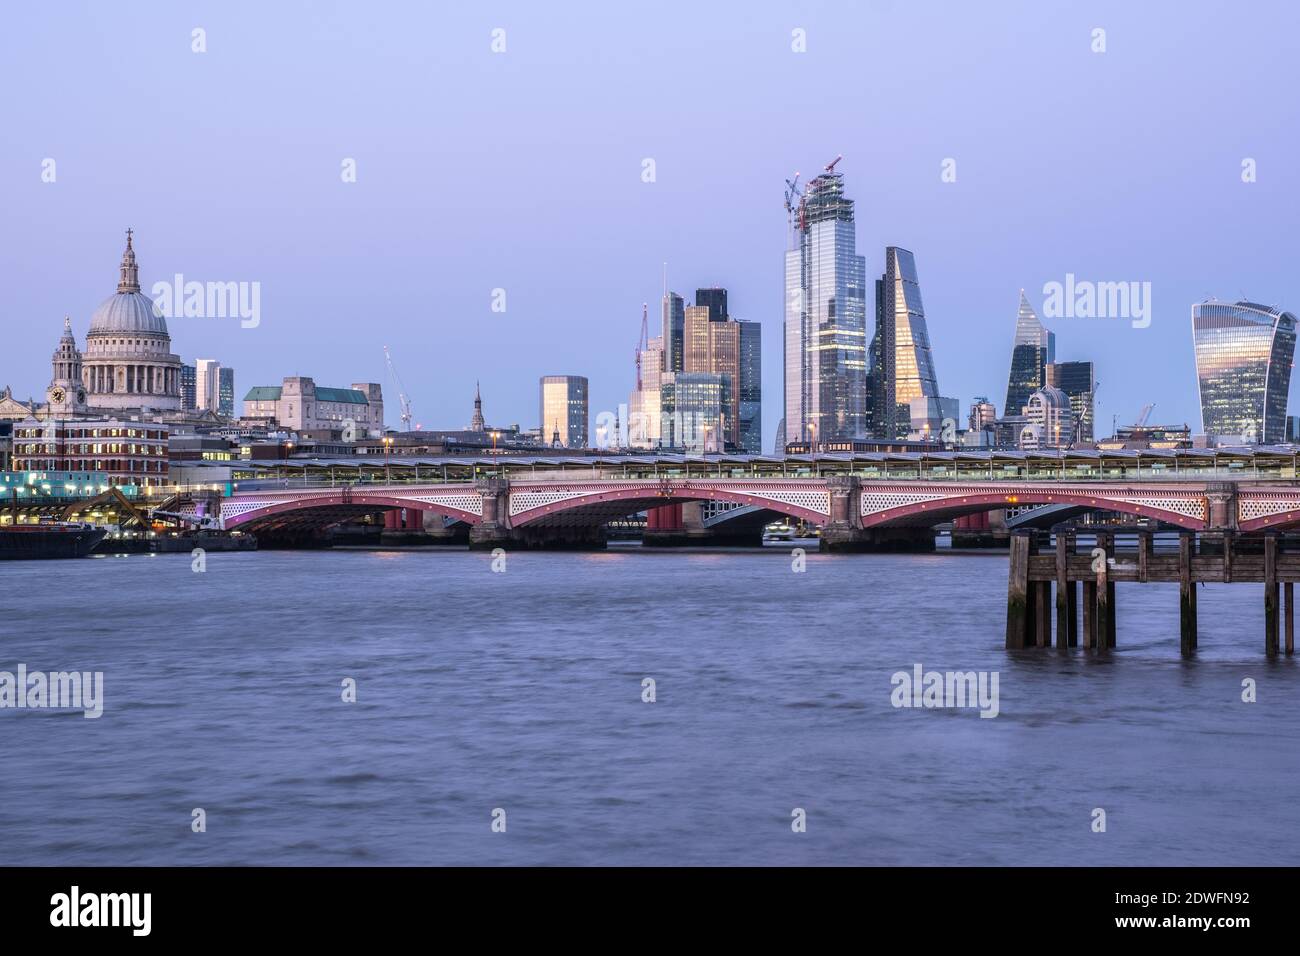 London city centre and its buildings during a pink sunset in a clear sky Stock Photo